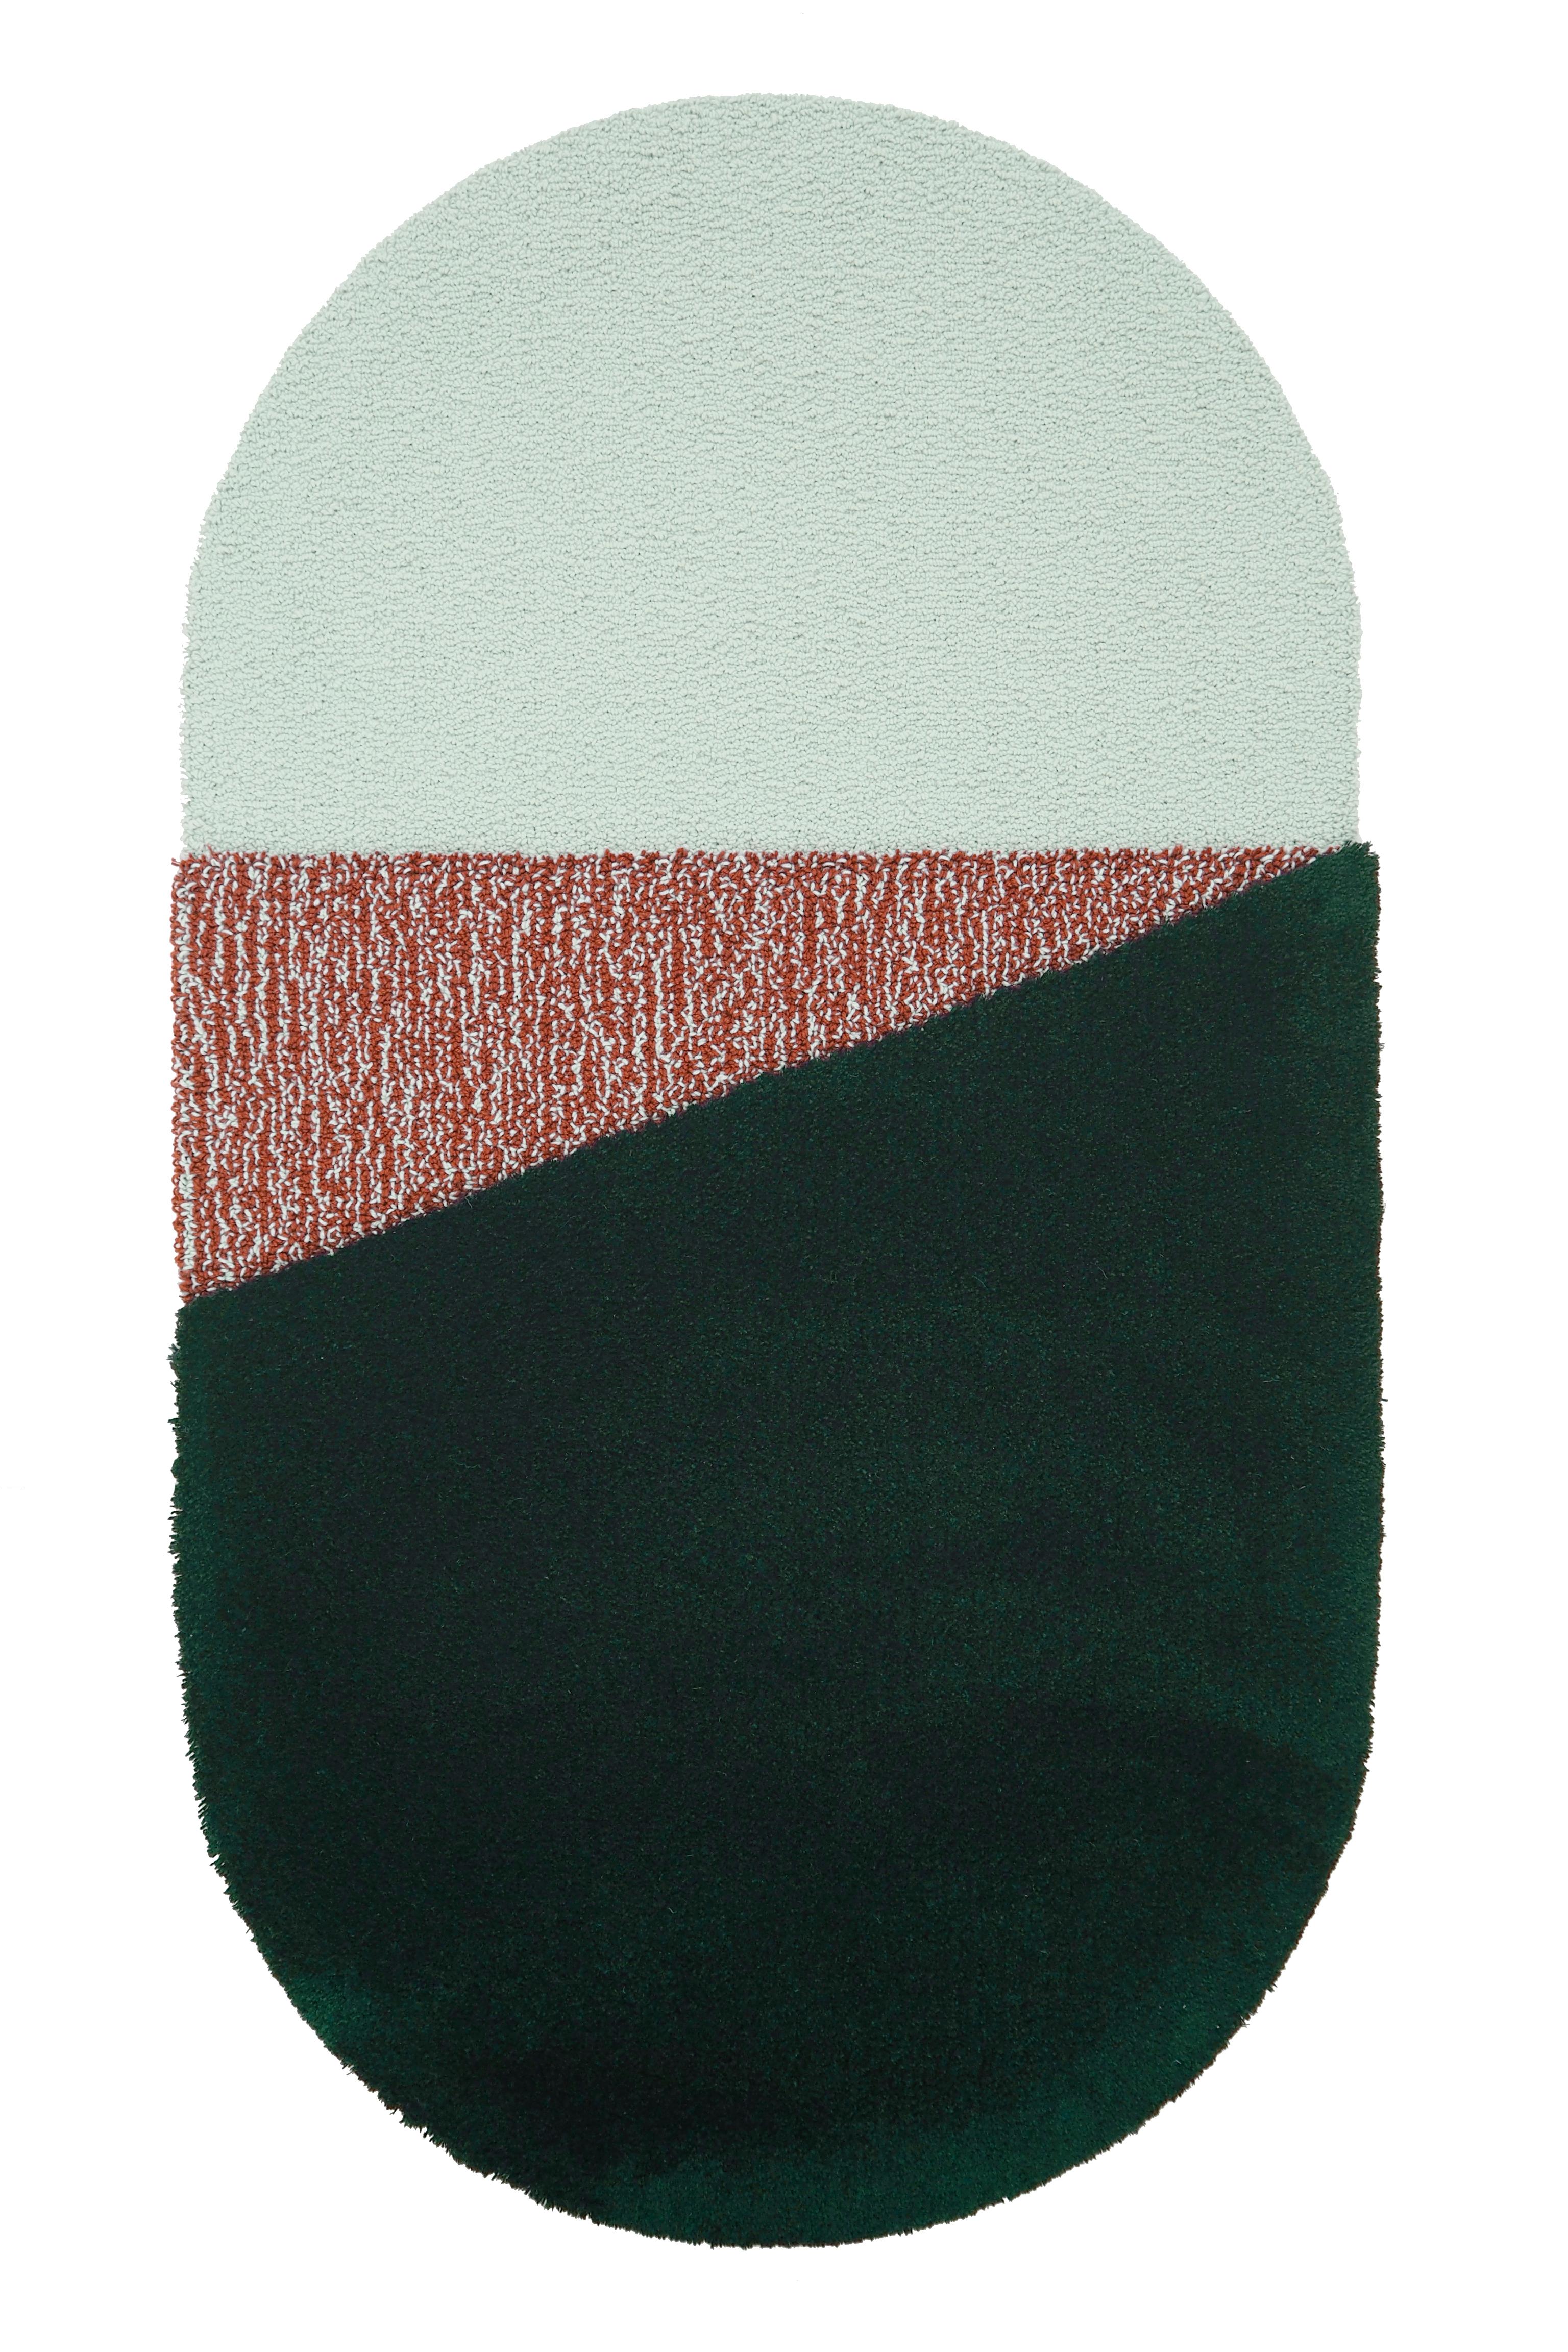 Italian OCI Triptych S, Composition of 3 Rugs 100% Wool / Green/Brick by Portego For Sale